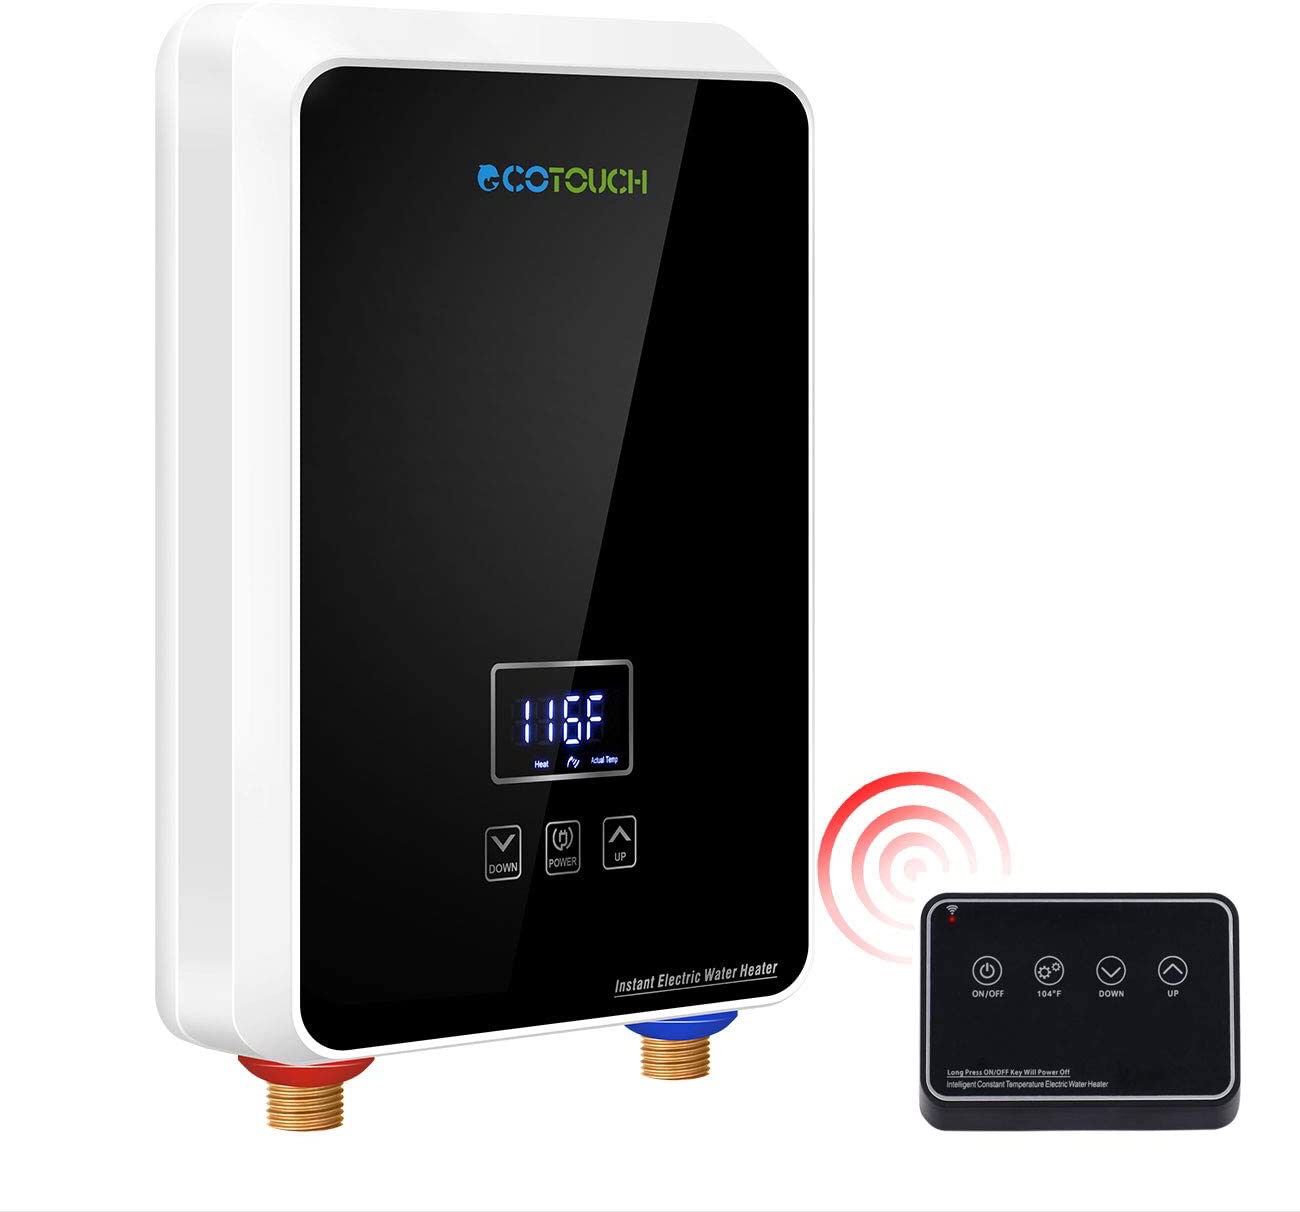 ECOTOUCH Tankless Water Heater Electric, 1.5 GPM On Demand Hot Water Heater